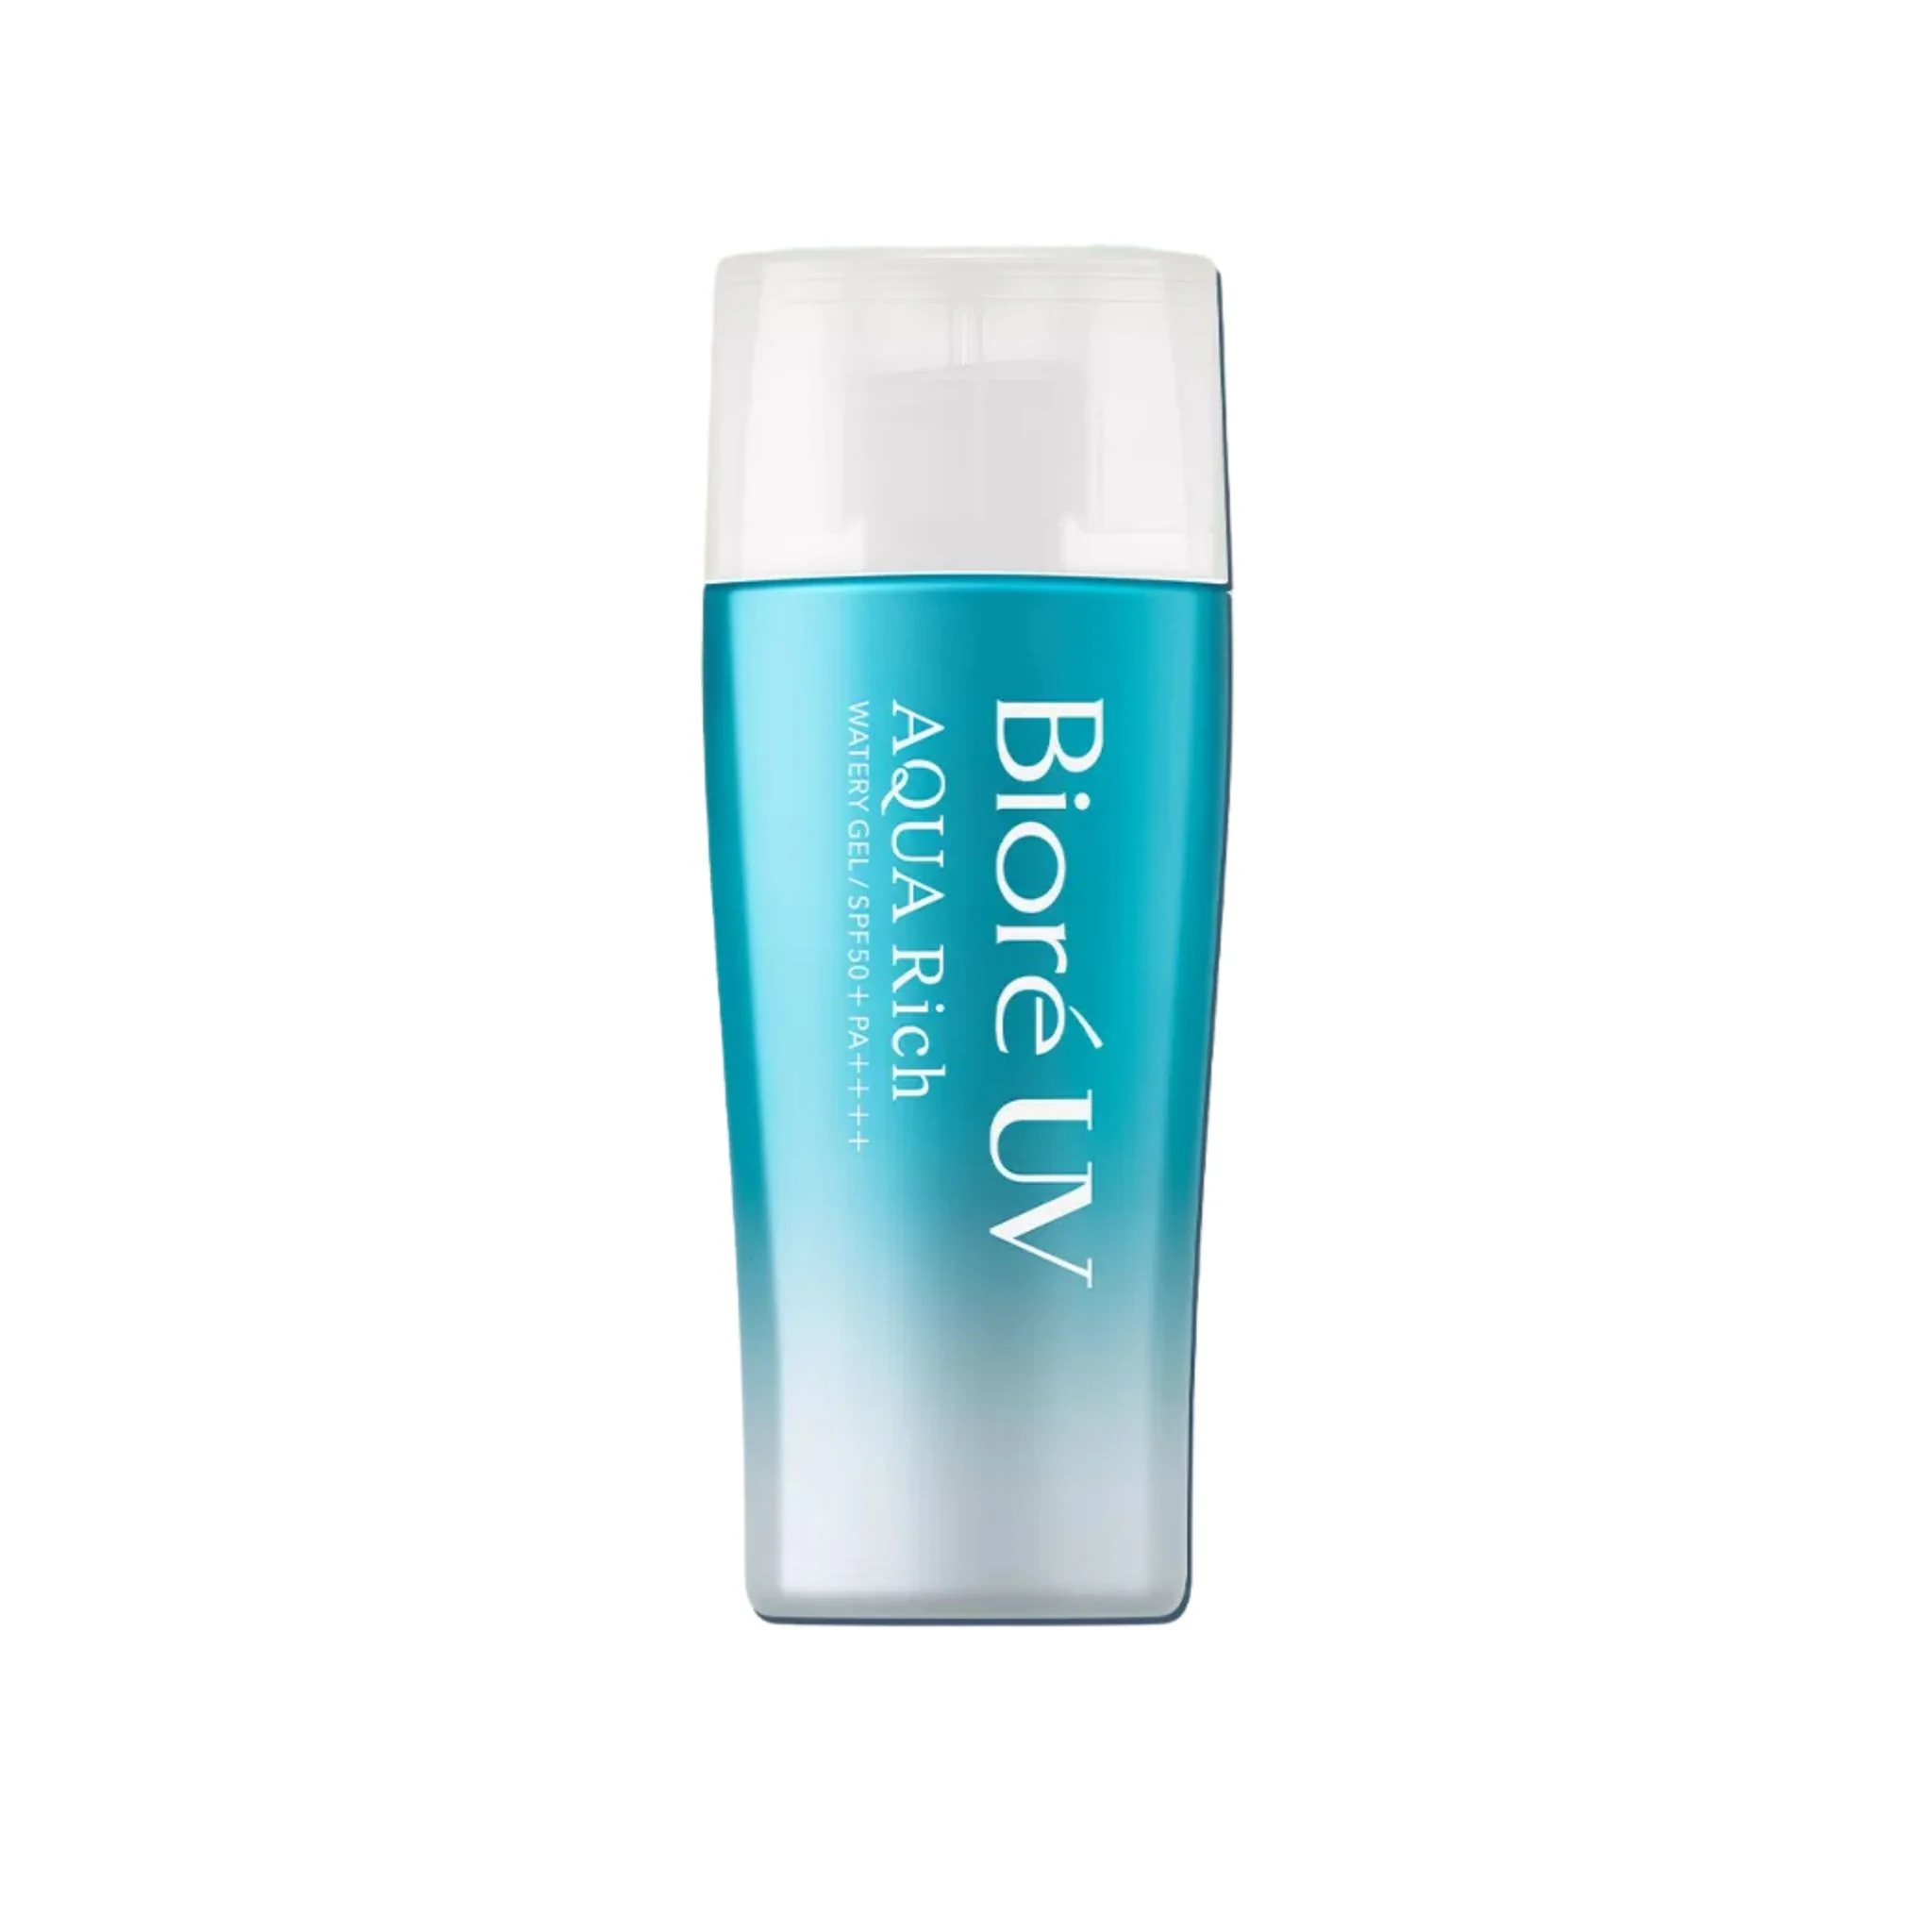 UV Aqua Rich Watery Gel SPF 50+ PA++++ by Biore, improved for 2023.